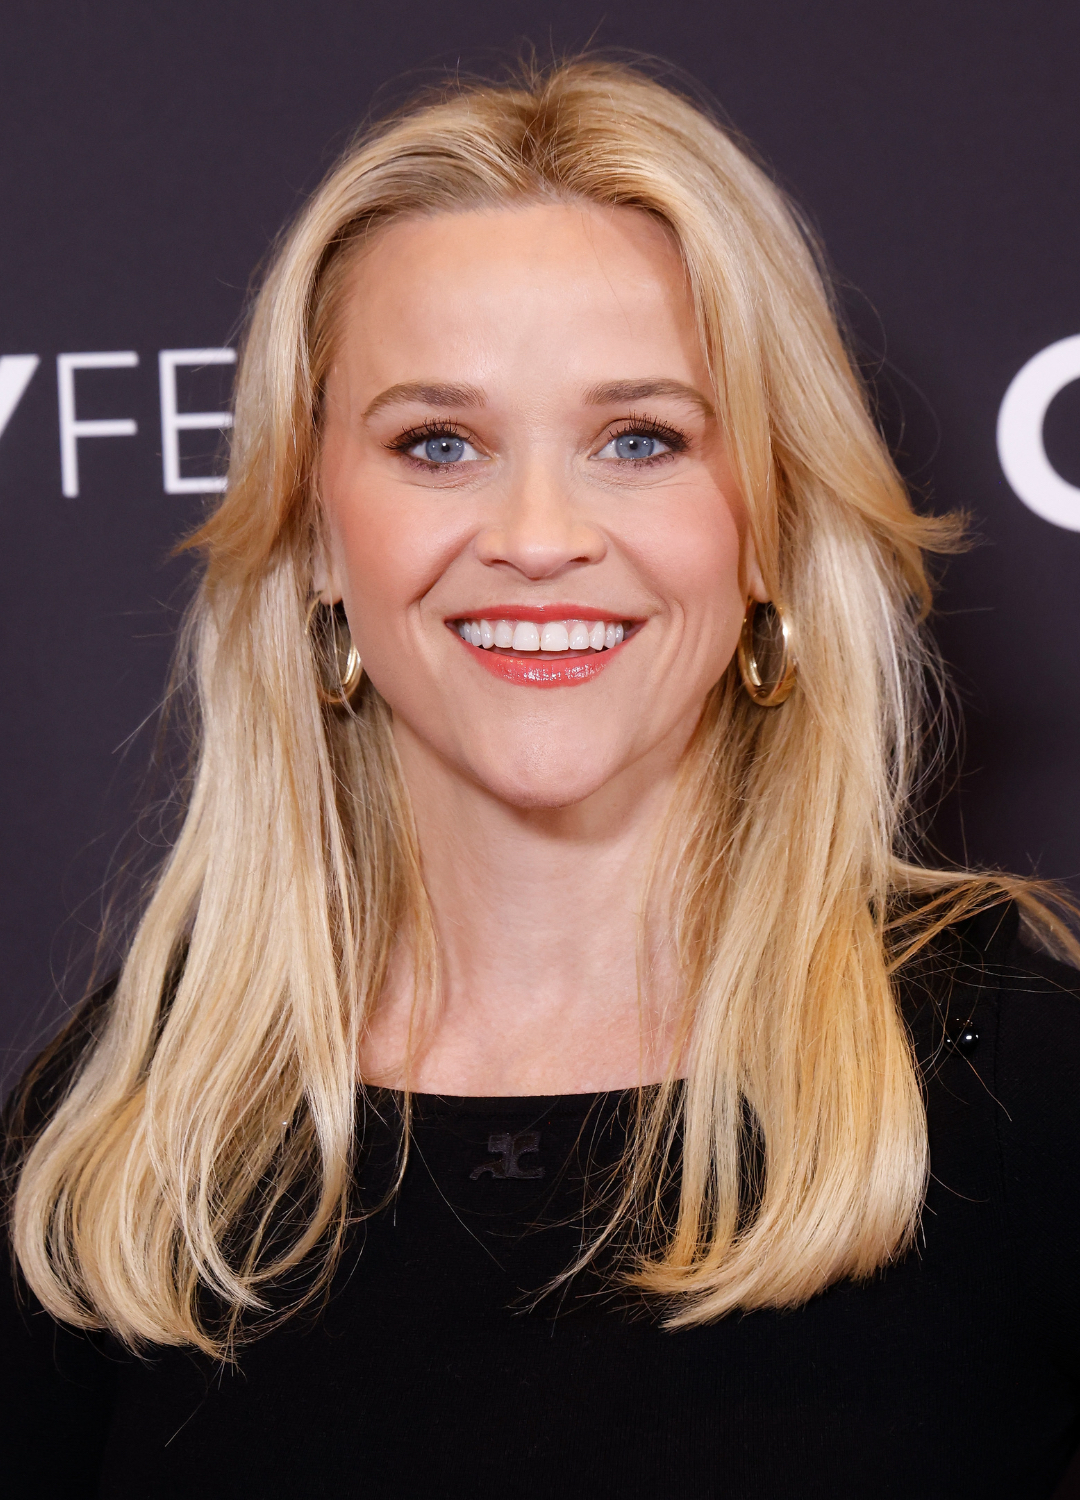 Reese Witherspoon attends a screening of 